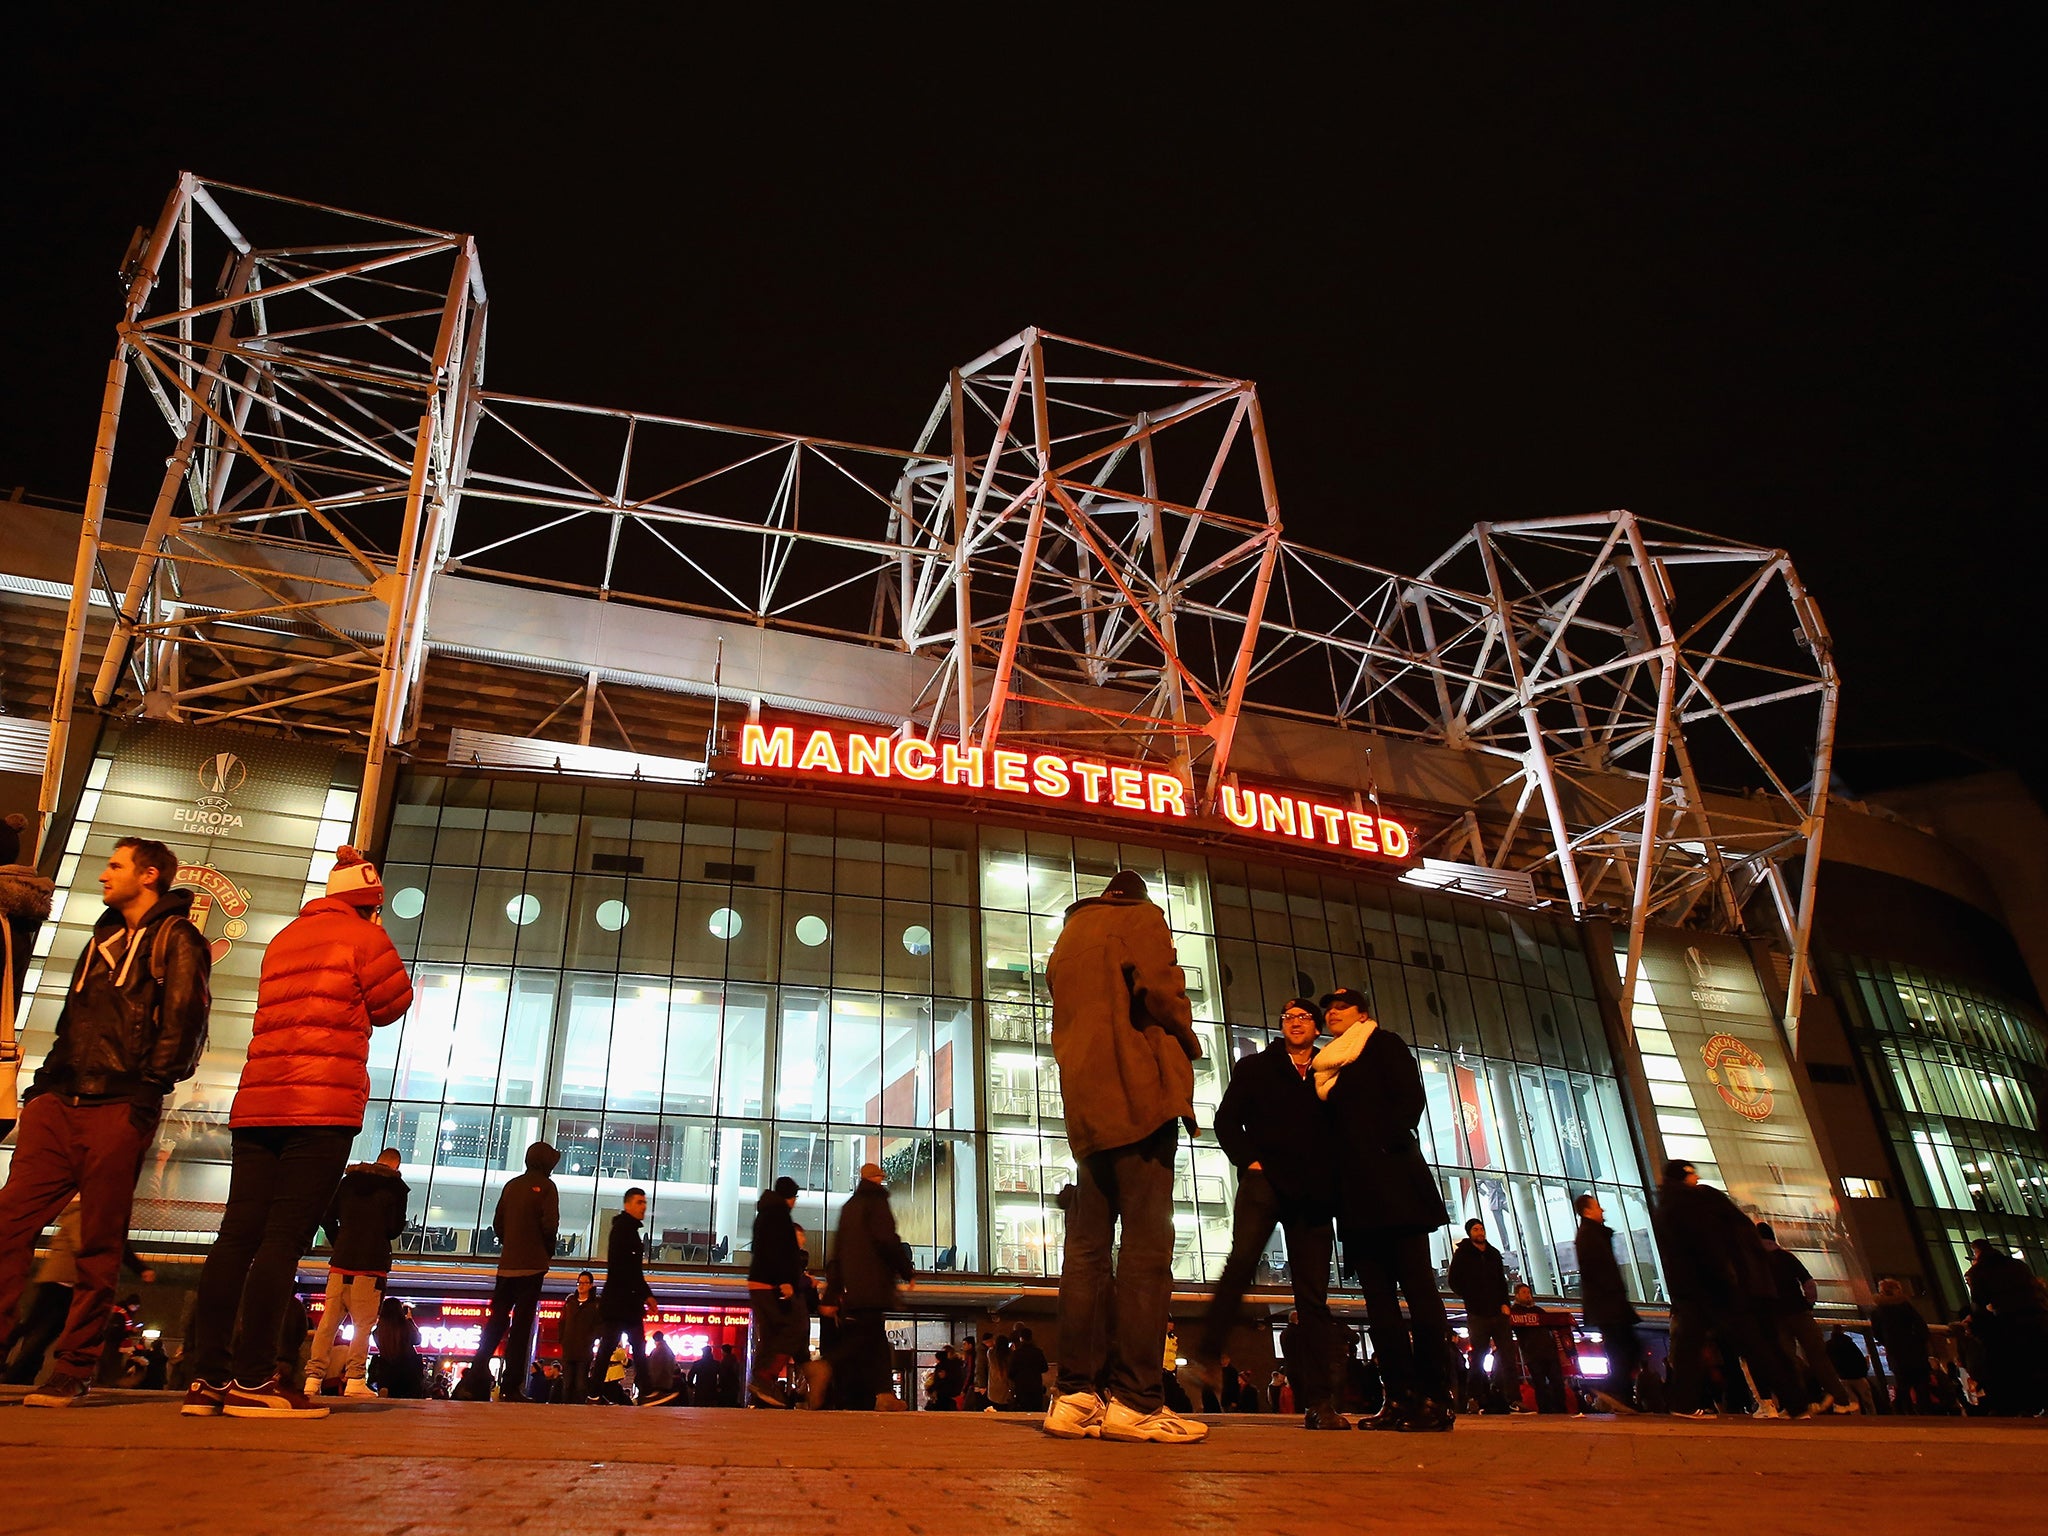 Old Trafford hosts Manchester United vs Crystal Palace tonight